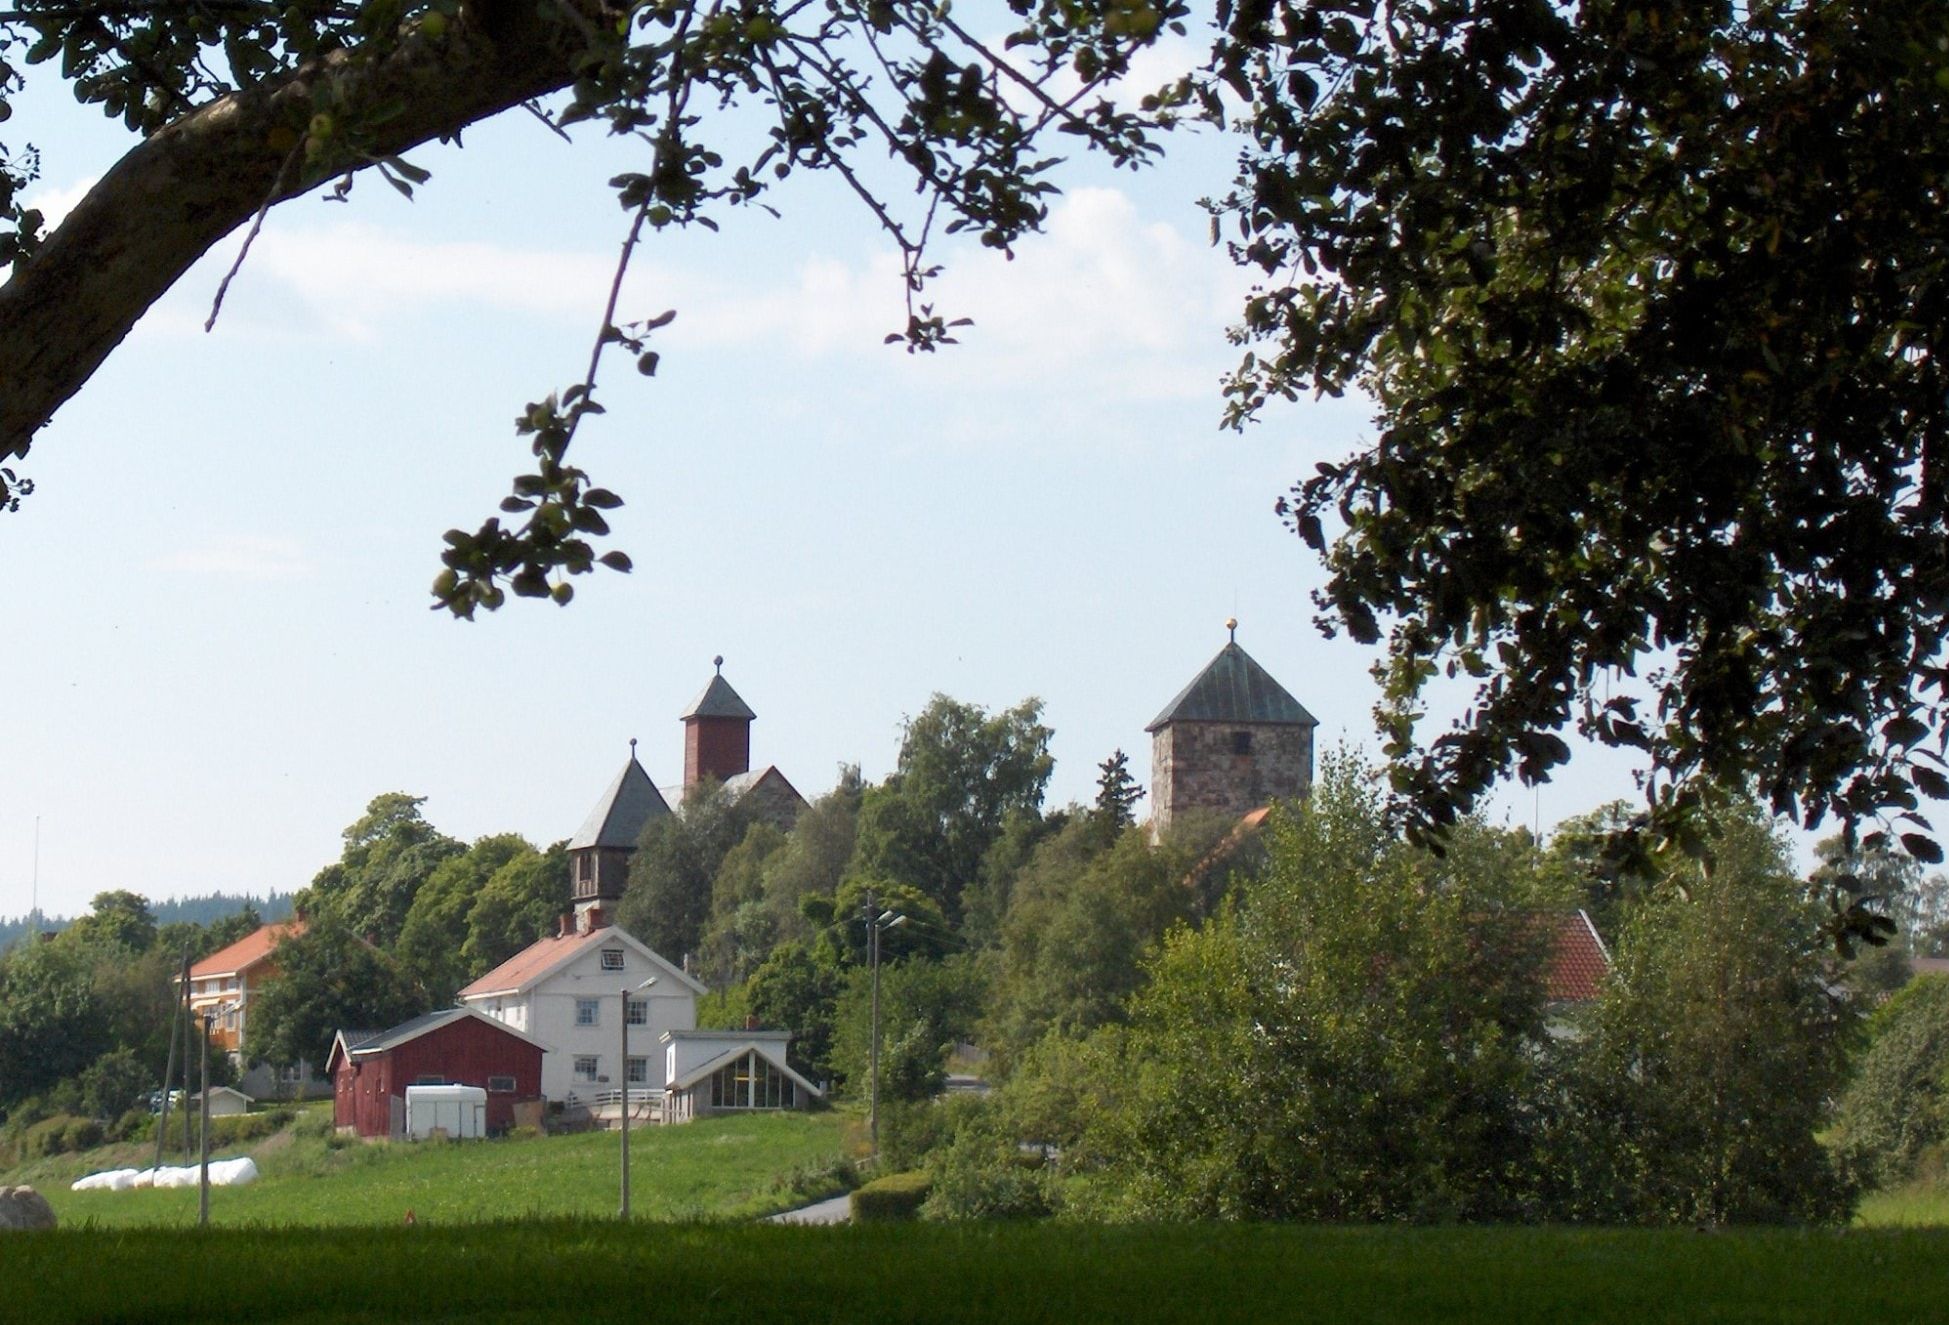 Scenery with churches